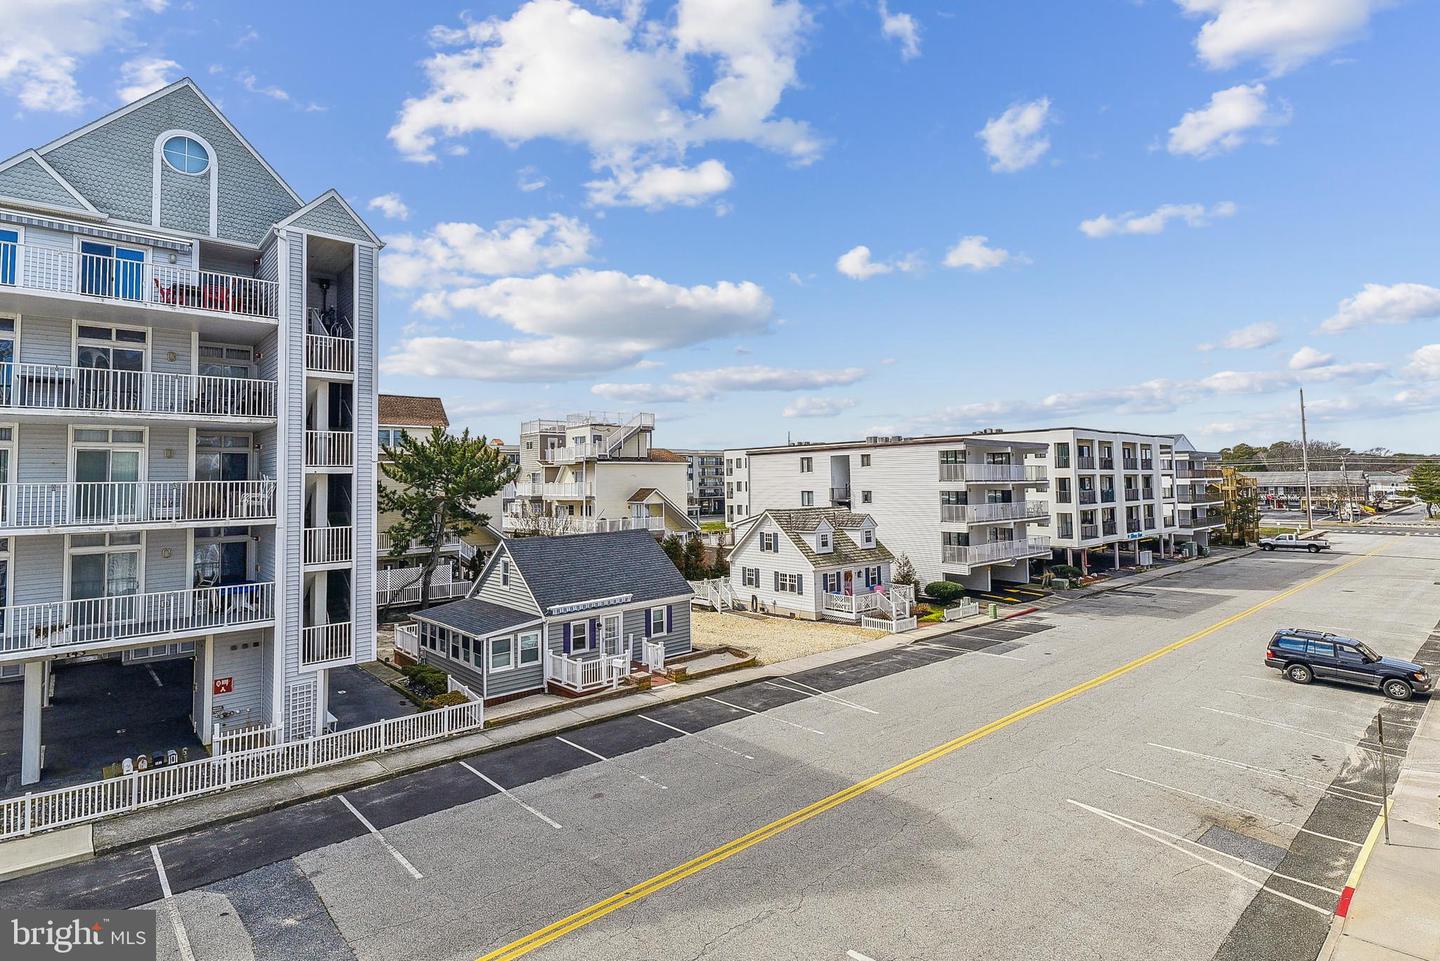 MDWO2019340-802917258030-2024-03-12-11-41-08 14301 Wight St #201 | Ocean City, MD Real Estate For Sale | MLS# Mdwo2019340  - 1st Choice Properties